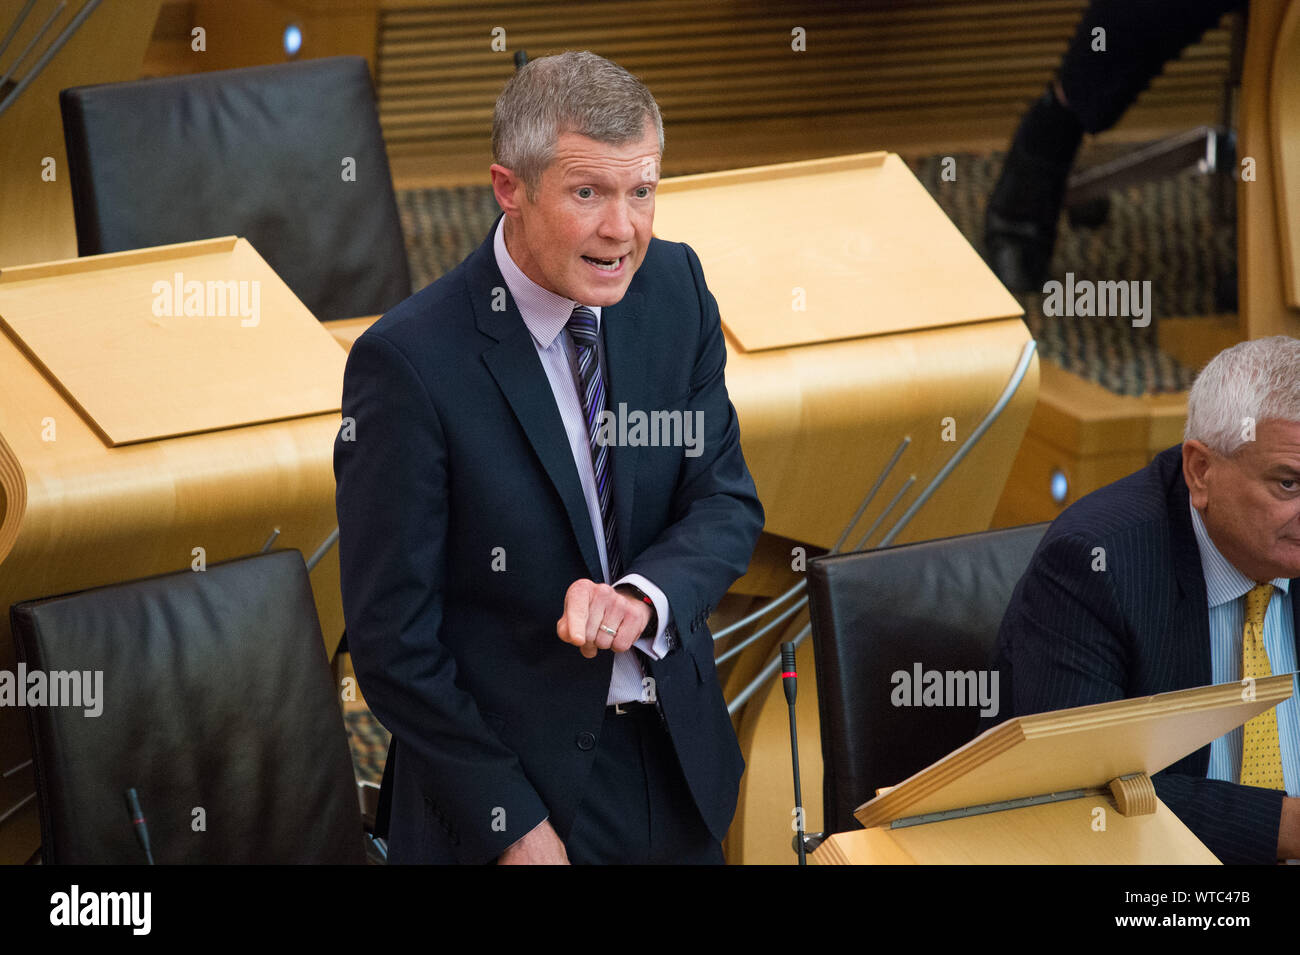 Edinburgh, UK. 5 September 2019. Pictured: Willie Rennie MSP - Leader of the Scottish Liberal Democrat Party. Scottish Government Debate: Avoiding A No Deal Exit From The EU.  That the Parliament agrees that the UK should in no circumstances leave the EU on a no-deal basis, and condemns the Prime Minister’s suspension of the UK Parliament from as early as 9 September until 14 October 2019. The result of the division is: For 87, Against 28, Abstentions 0. Colin Fisher/CDFIMAGES.COM Stock Photo